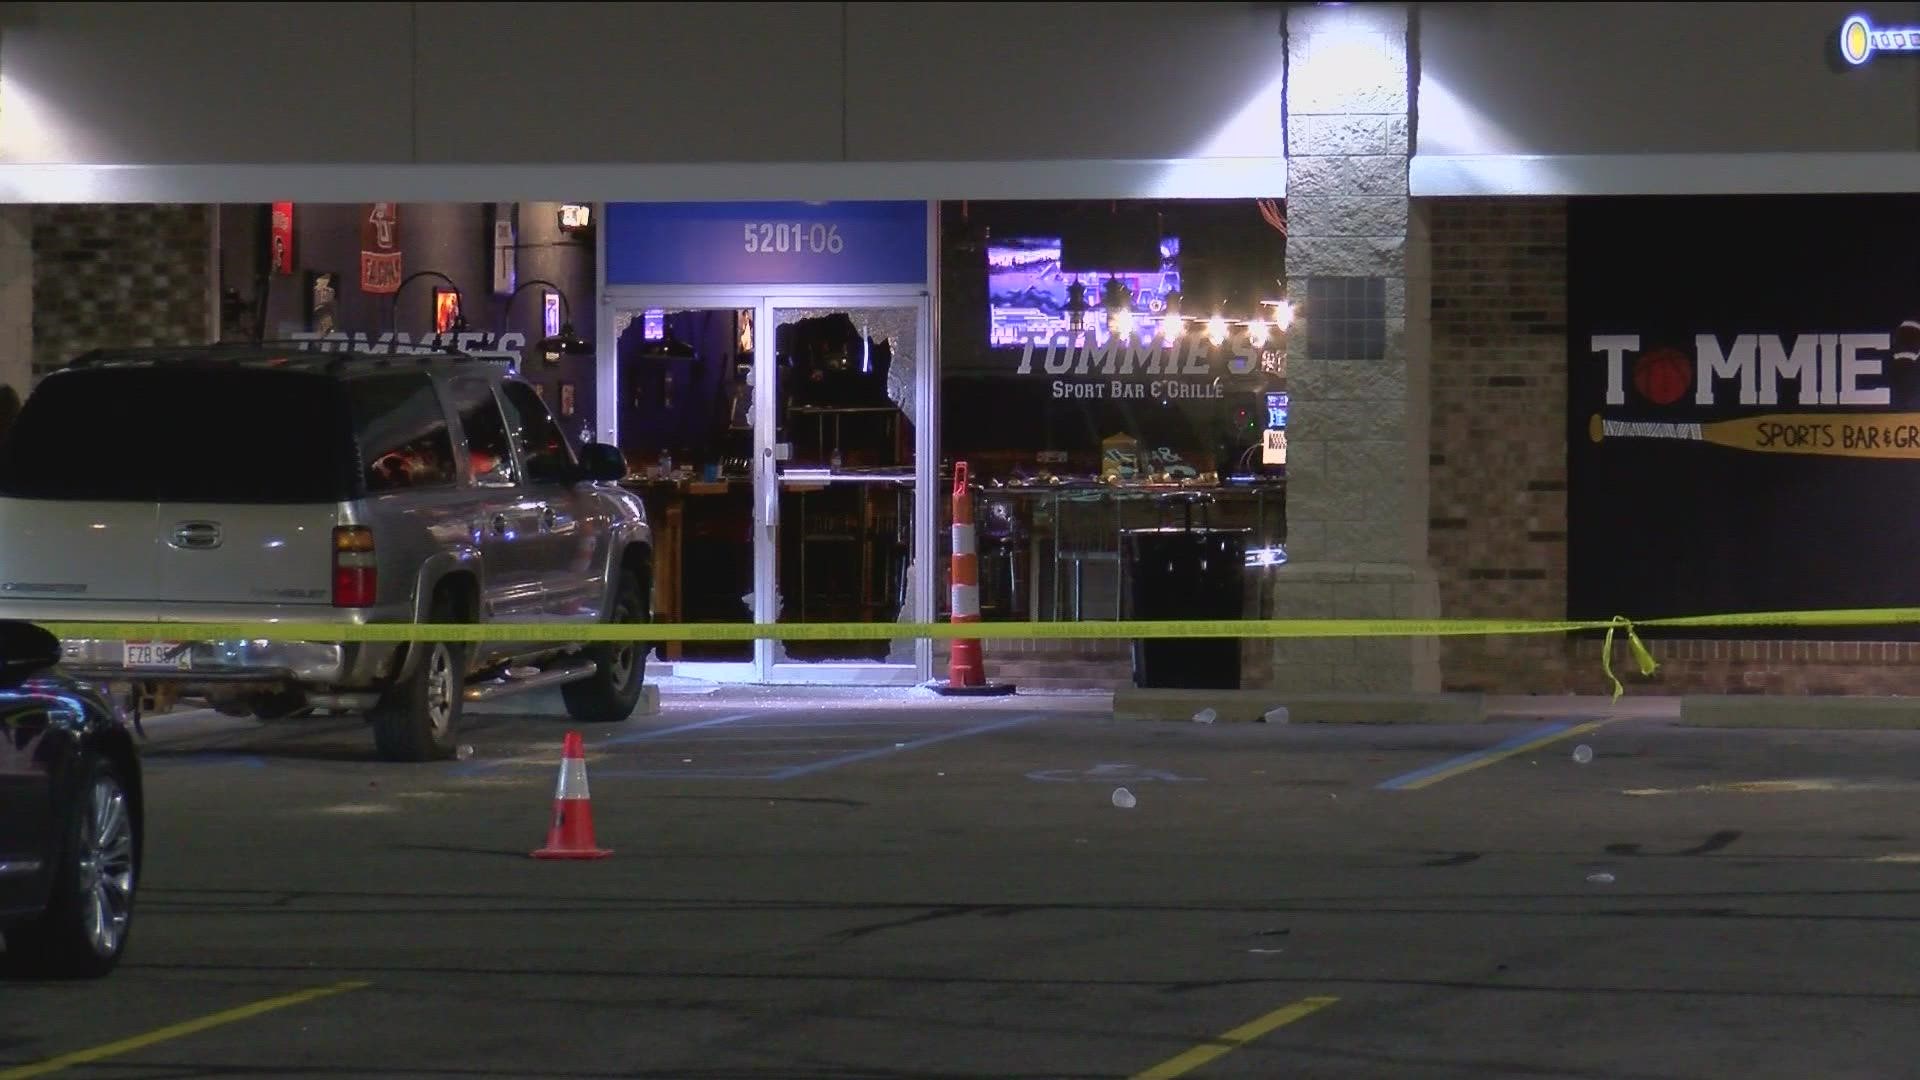 Police are searching for the person who shot into Tommie's Sports Bar and Grille on Monroe Street at about 1 a.m. Friday.